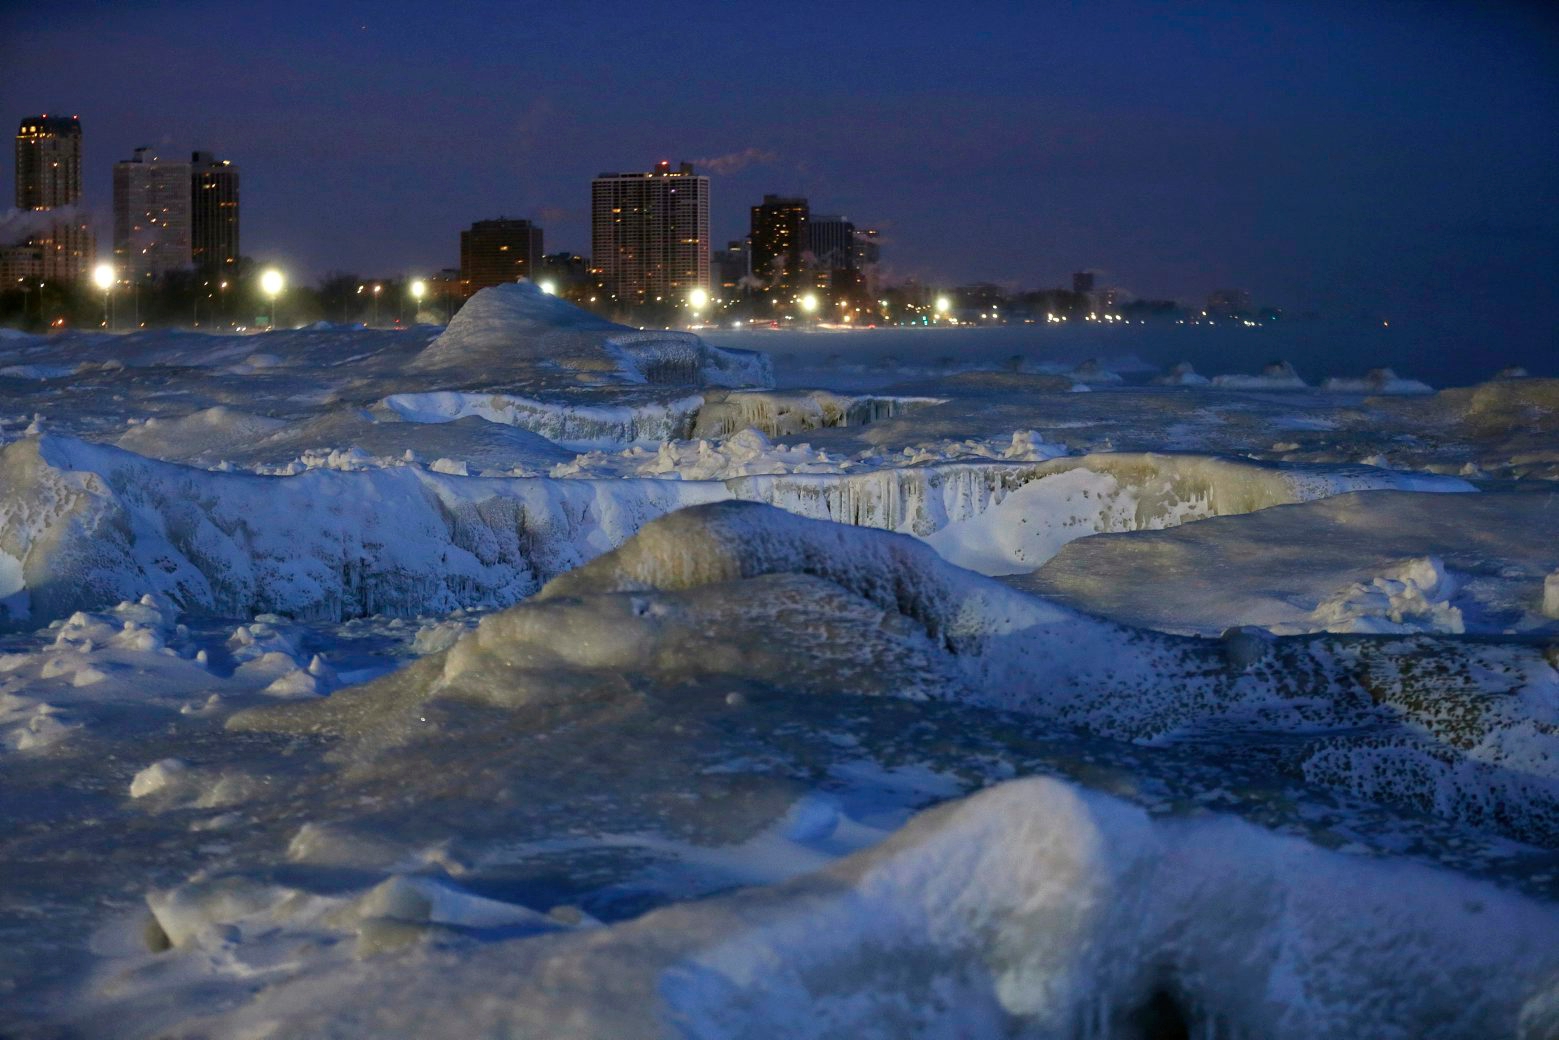 Ice forms along the shore of Lake Michigan before sunrise, Wednesday, Jan. 30, 2019, in Chicago. A deadly arctic deep freeze enveloped the Midwest with record-breaking temperatures on Wednesday, triggering widespread closures of schools and businesses, and prompting the U.S. Postal Service to take the rare step of suspending mail delivery to a wide swath of the region. (AP Photo/Kiichiro Sato) Winter Weather